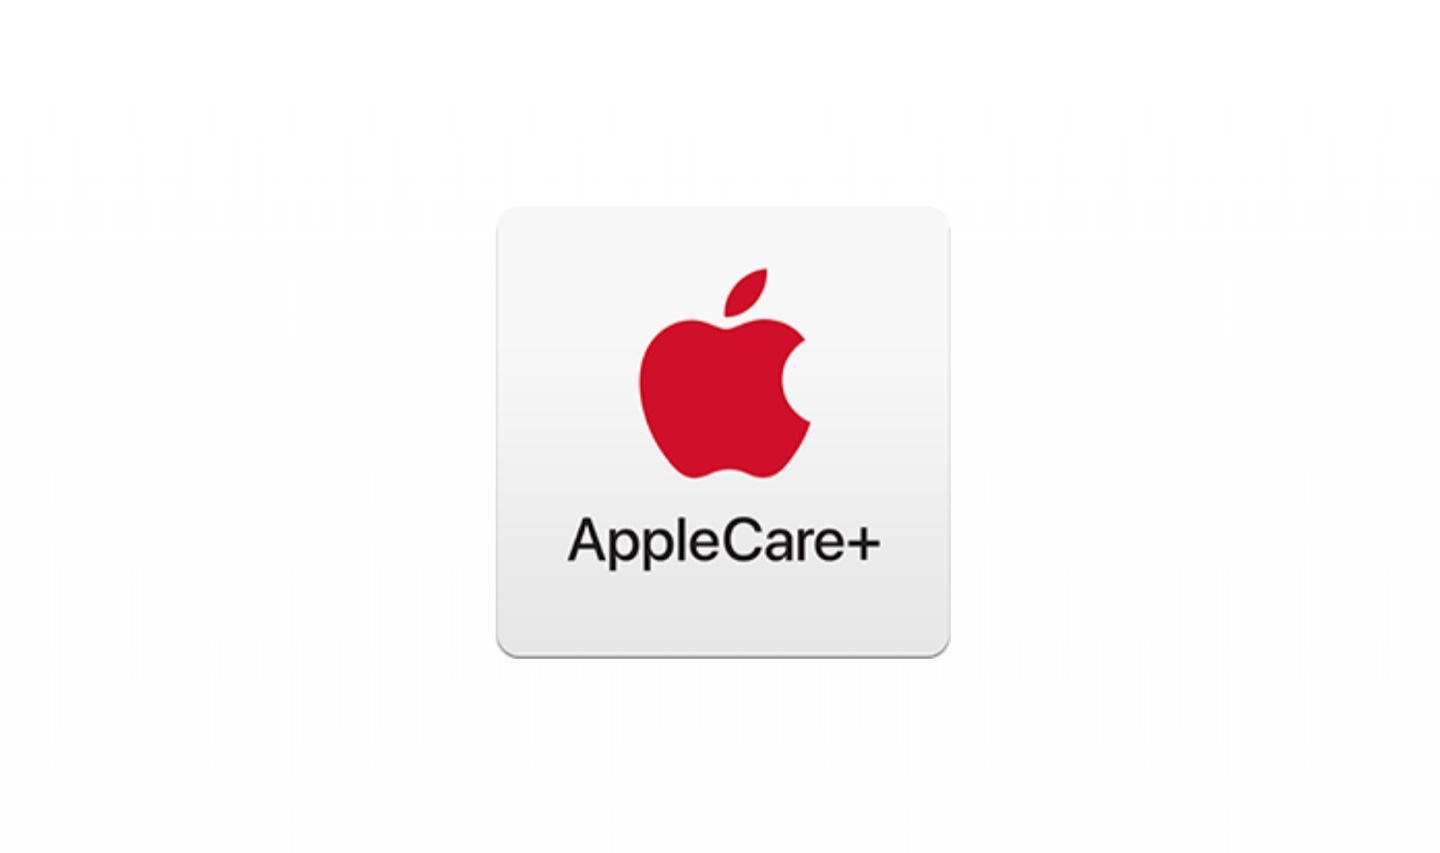 AppleCare+ for iPhoneに盗難・紛失プランが新たに登場！2回まで 